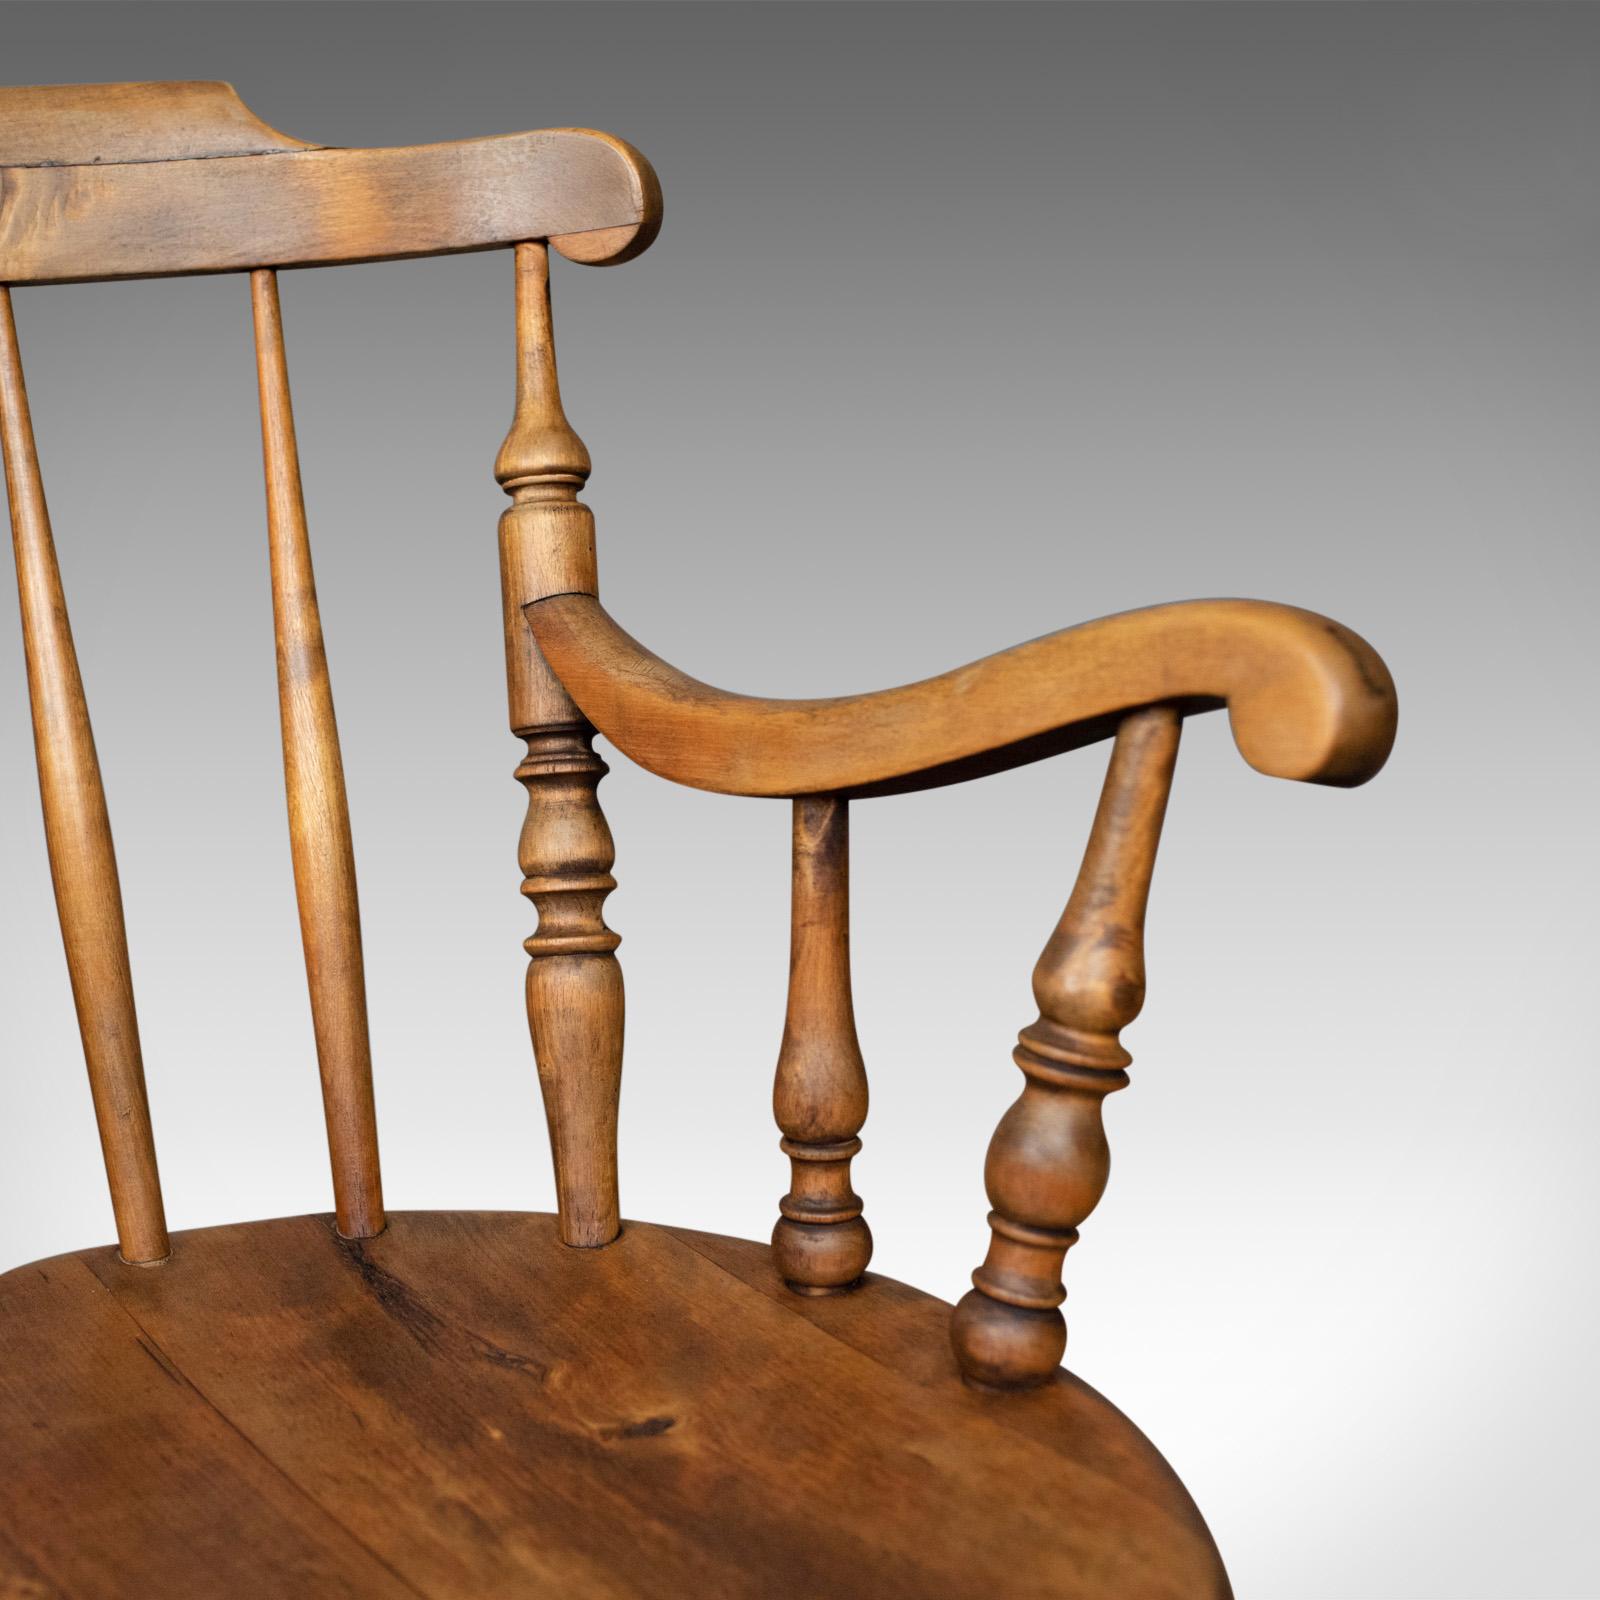 Late Victorian Antique Elbow Chair, English, Victorian, Country Kitchen, Armchair, circa 1900